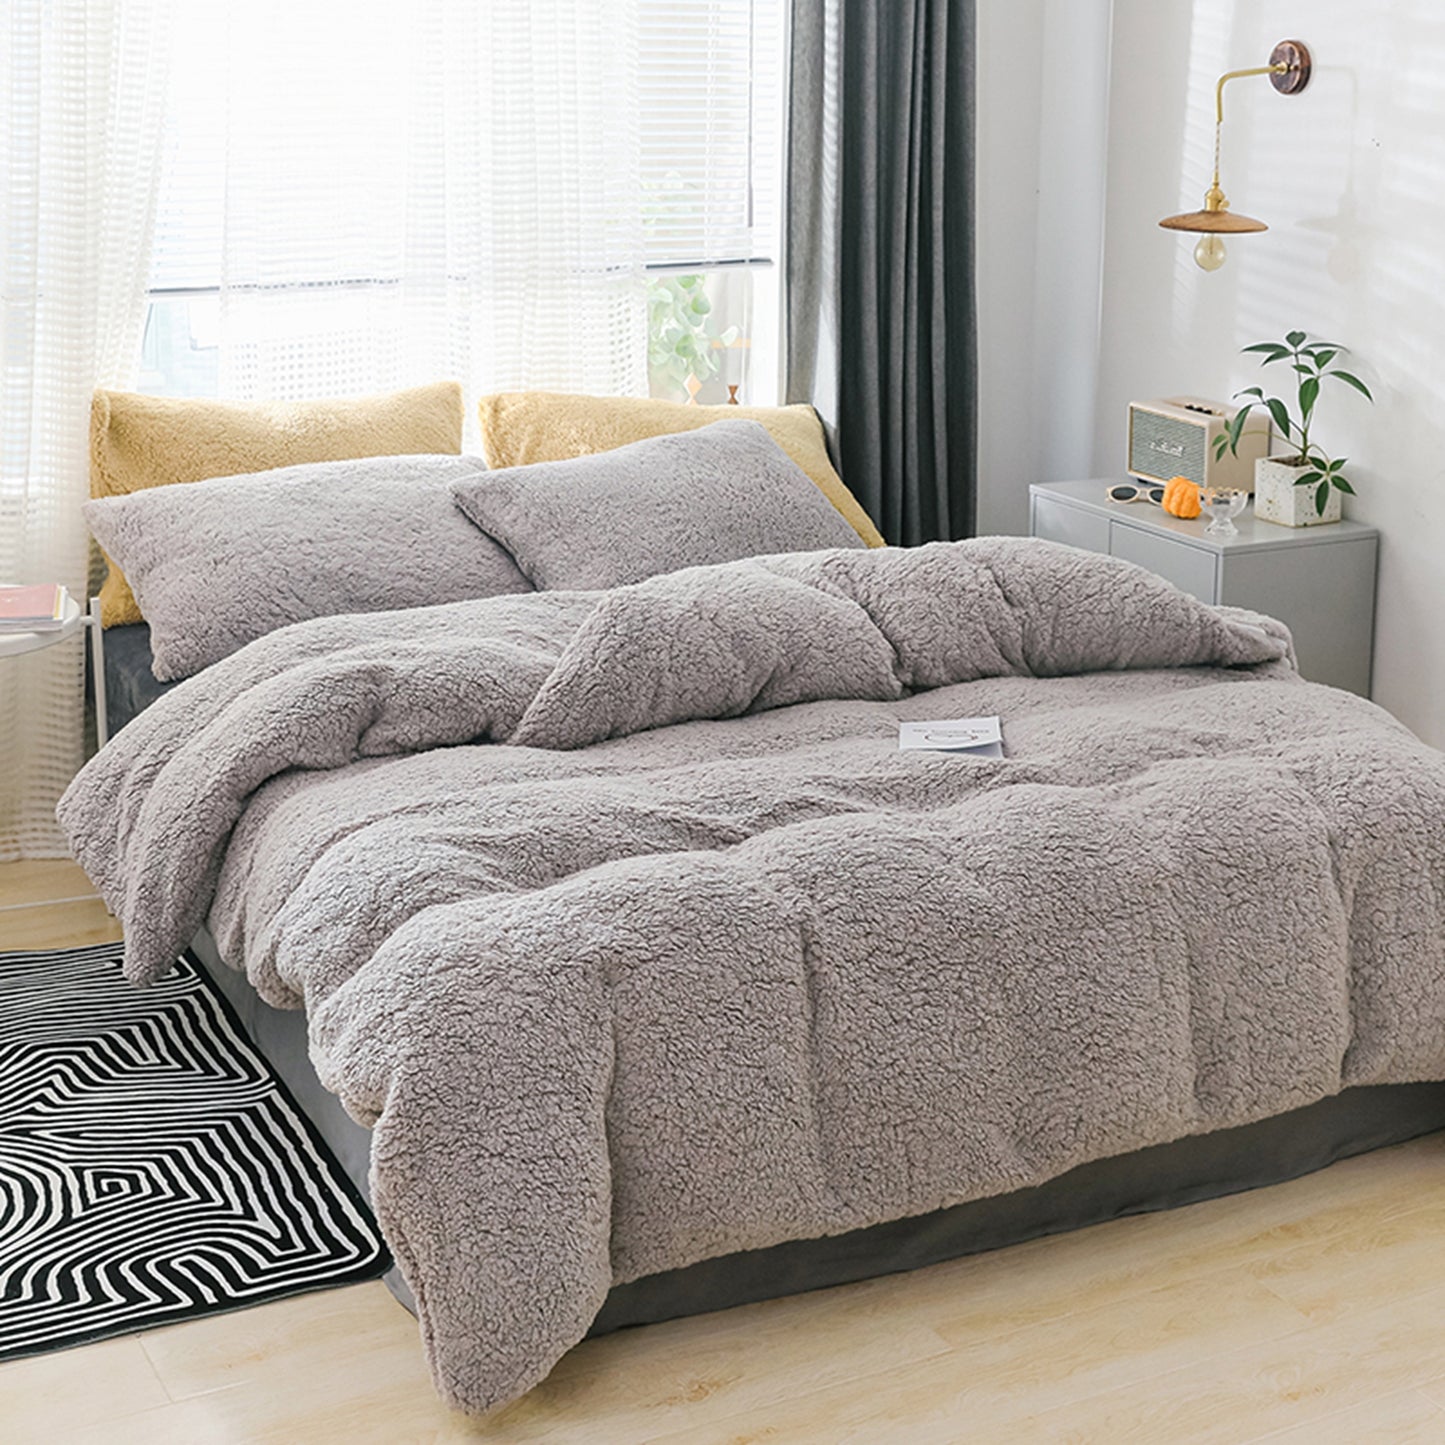 Grey Duvet Cover Set With 2 Pillow Cases